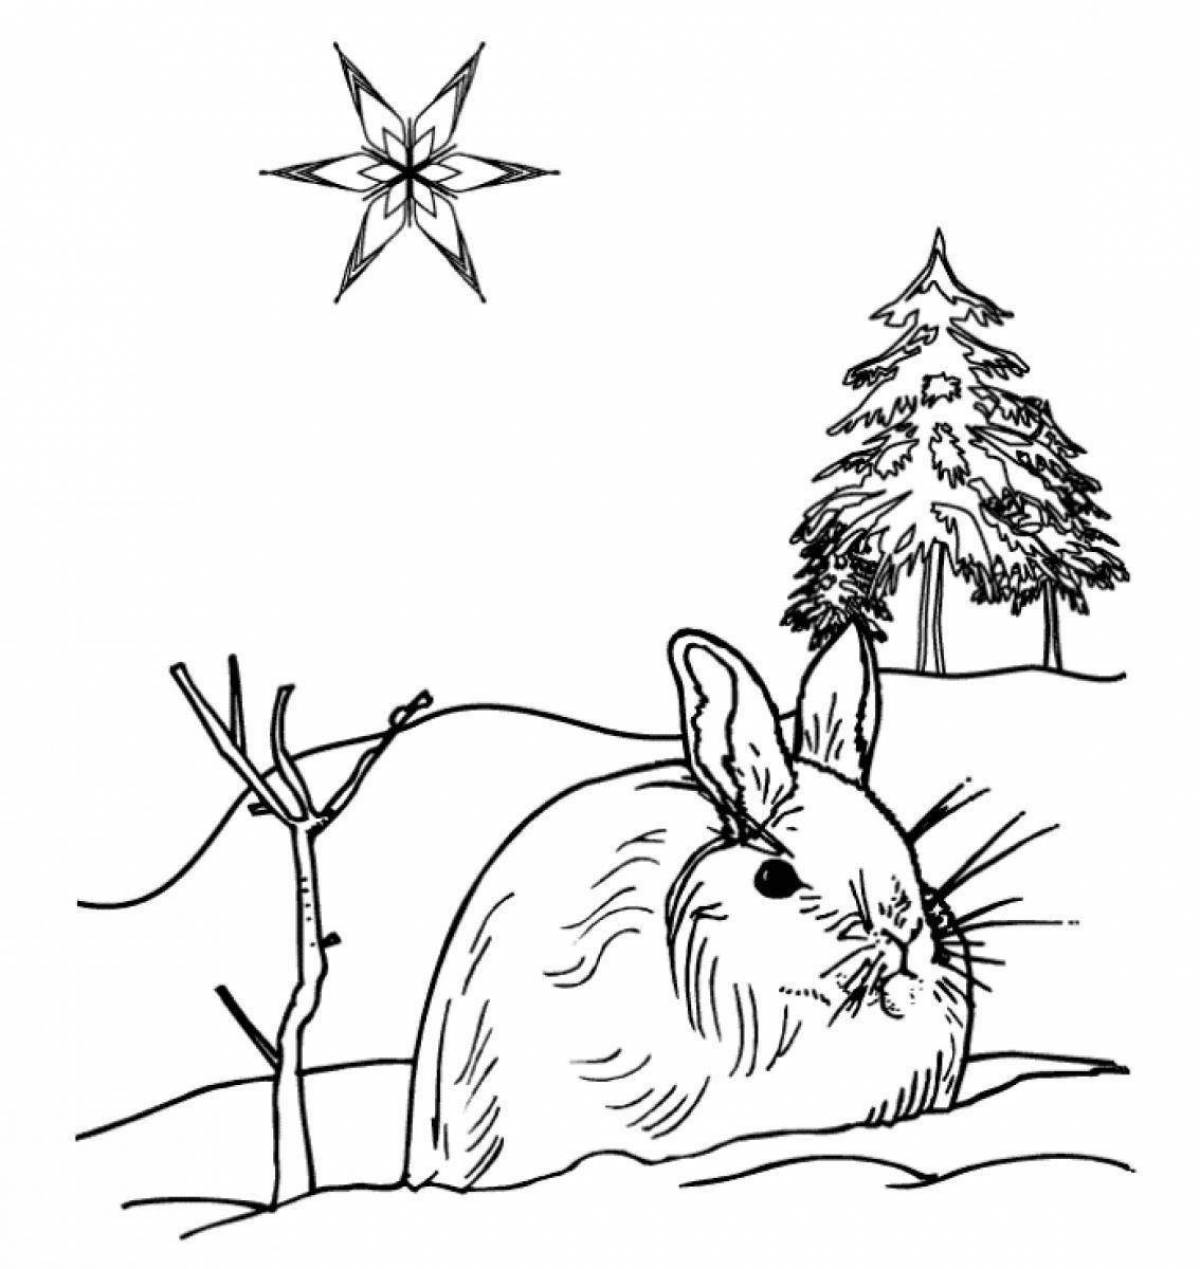 Funny animal coloring pages for kids in winter